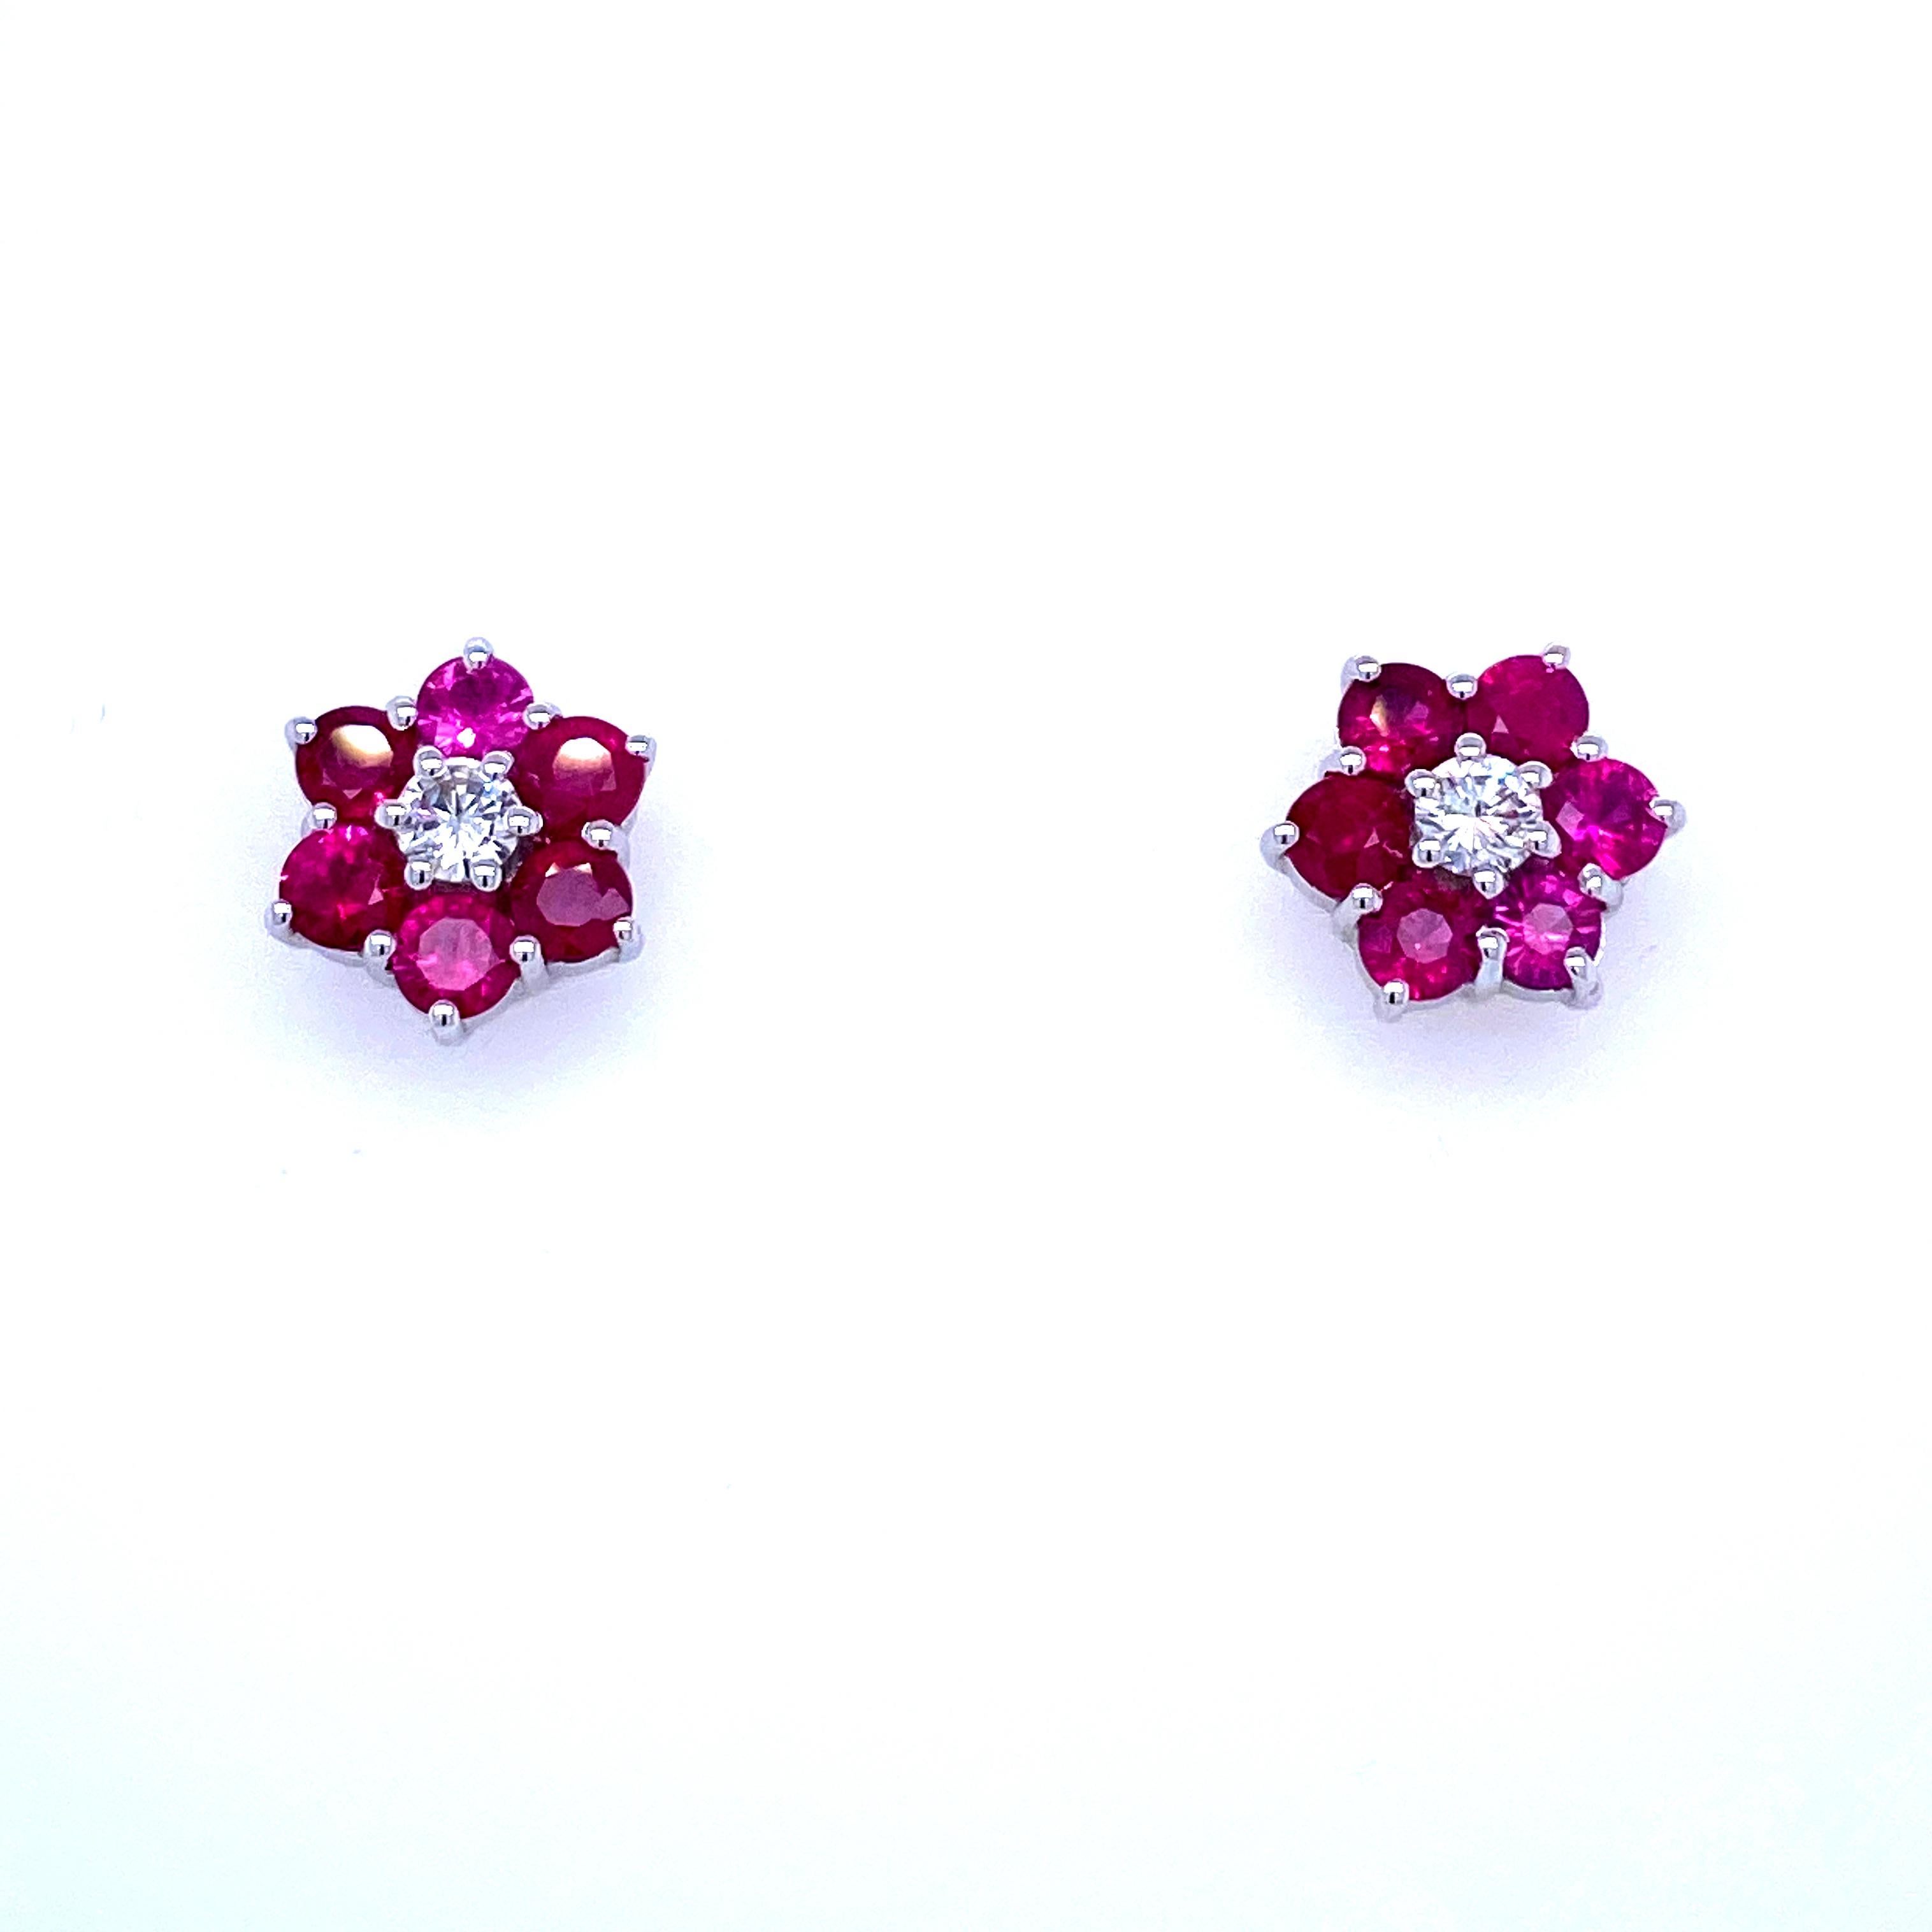 Pretty pair of vintage diamond cluster earrings set in solid 18k Gold. They are set with Natural Ruby and with two large Round Brilliant cut Diamonds in the center graded color G clarity Vvs2. 
Origin Italy 1980

CONDITION: Pre-owned - Excellent